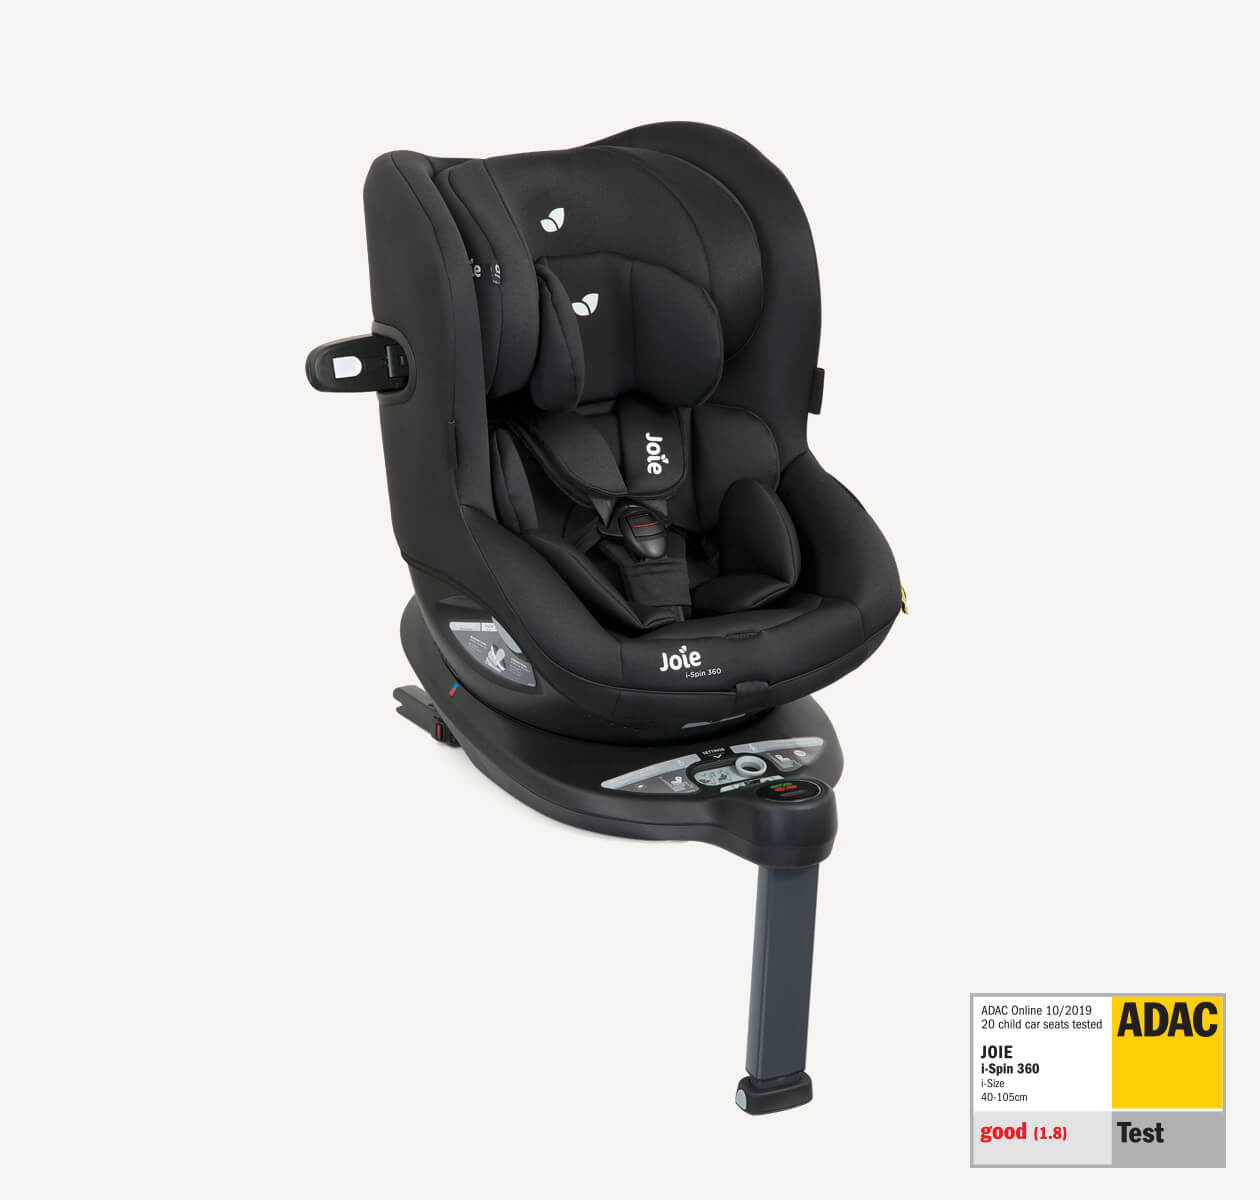  Joie I-Spin 360 spinning car seat in black at an angle, with the ADAC test label in the lower right corner.